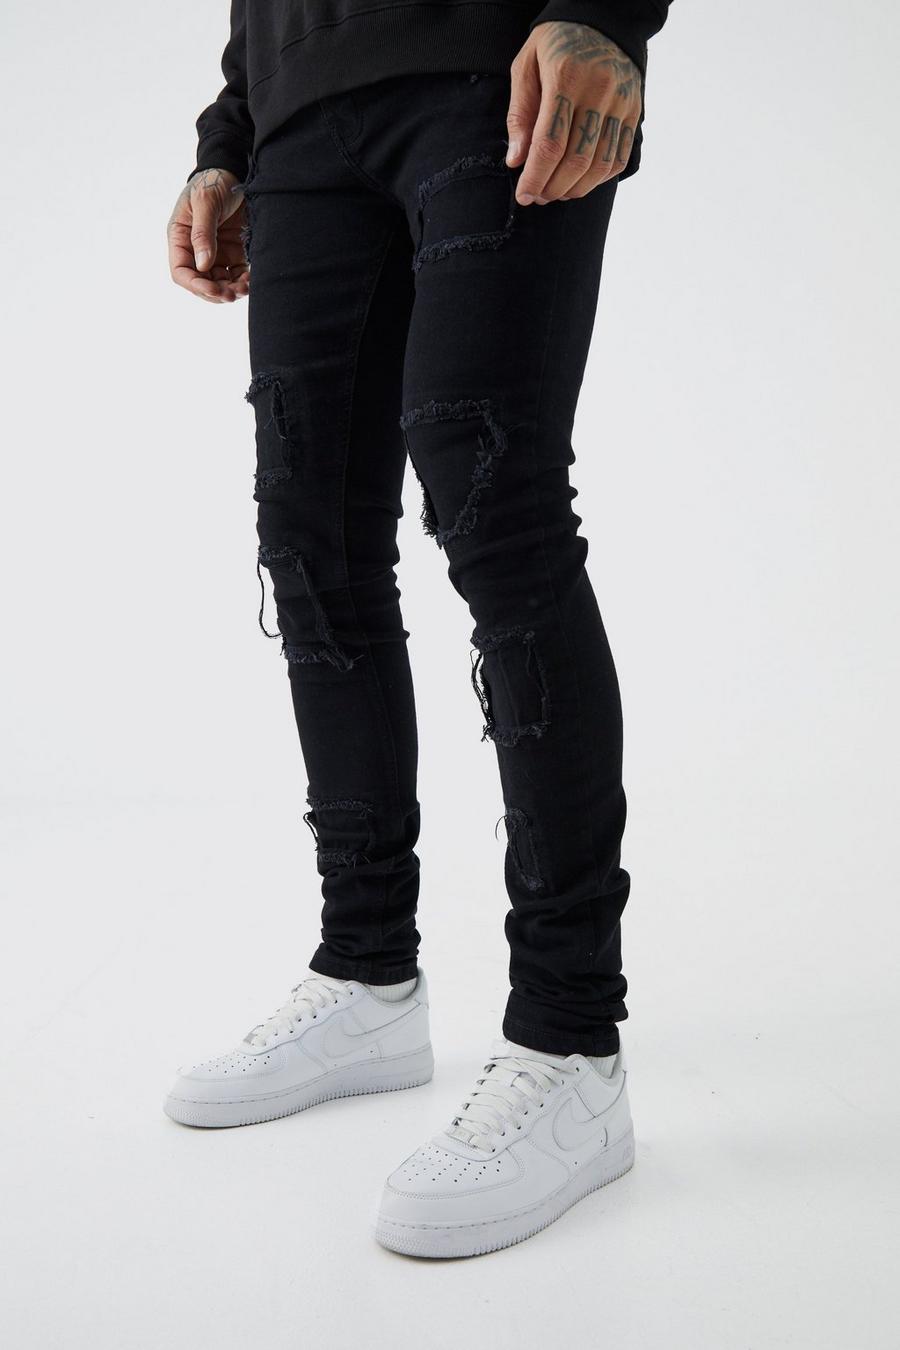 Men's Tall Skinny Stacked Distressed Ripped Jeans | Boohoo UK